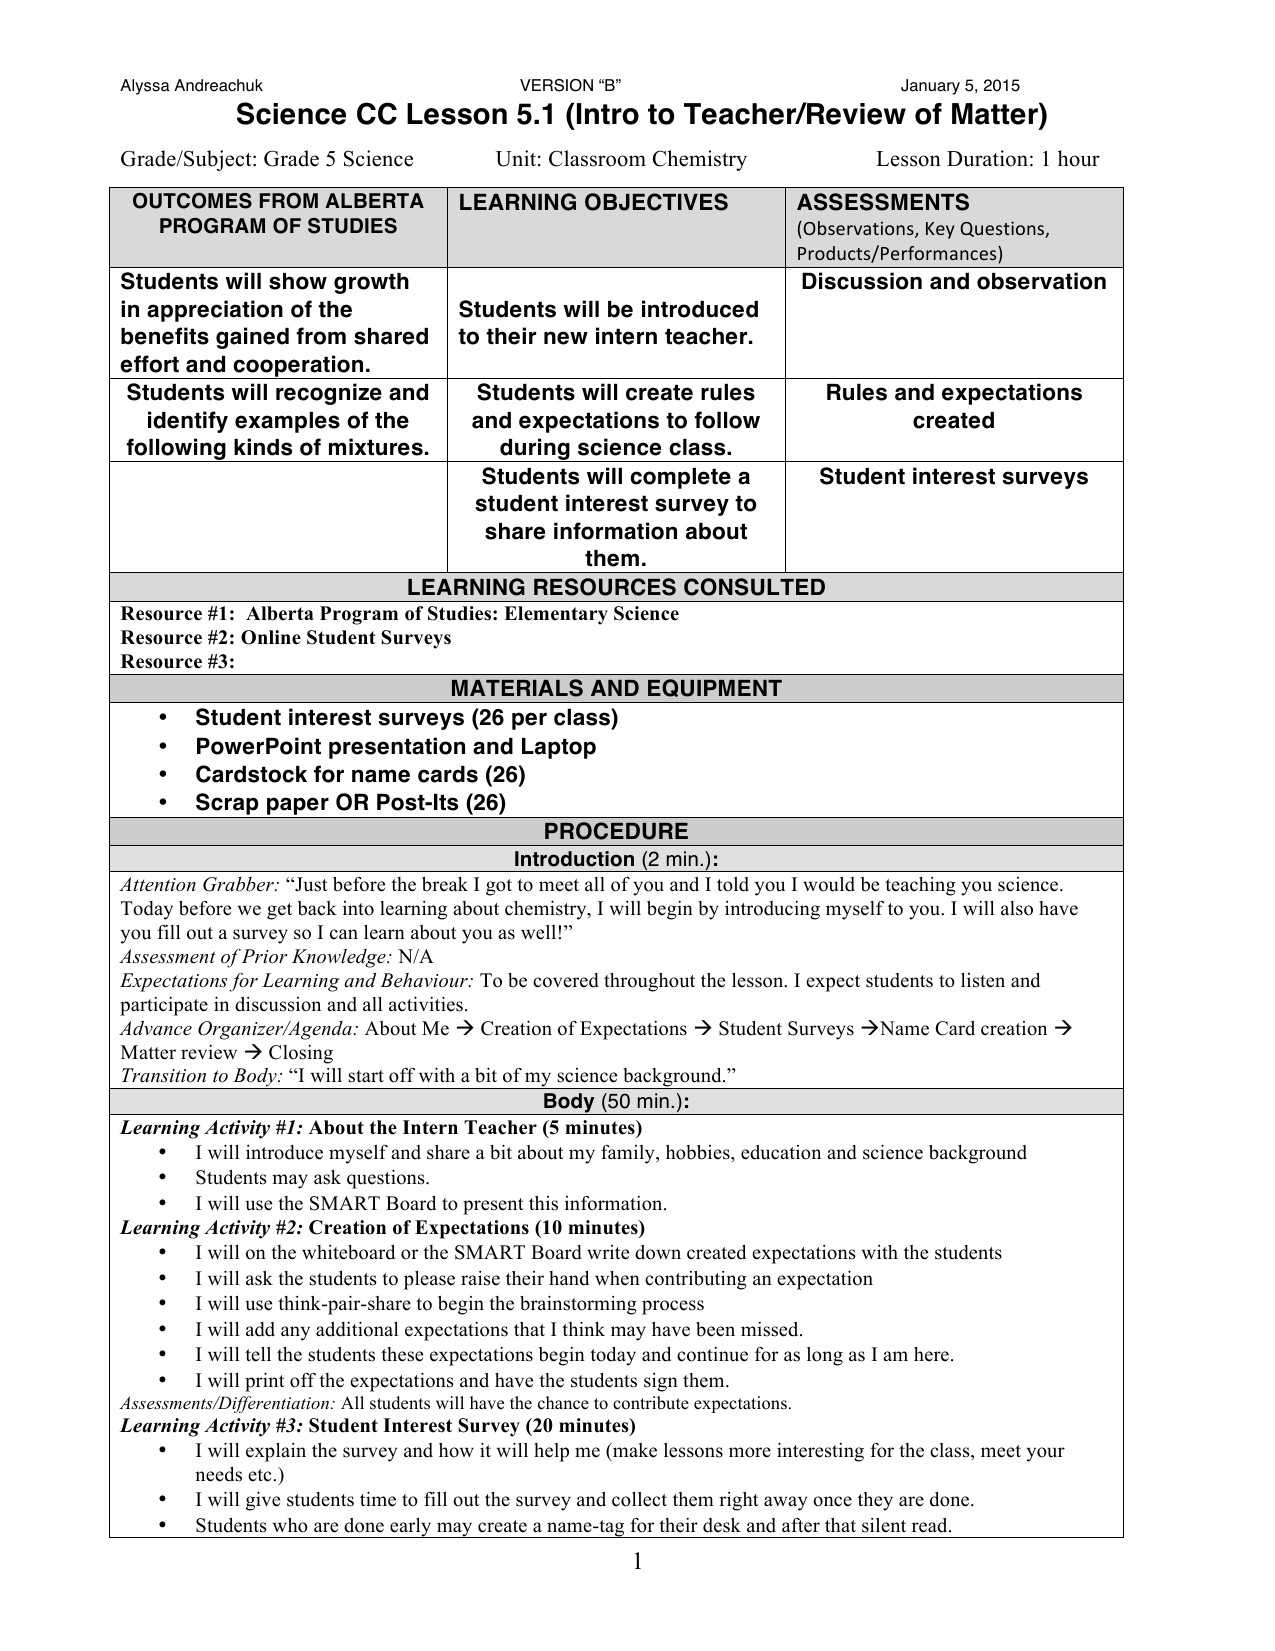 Gene Mutations Worksheet Lesson Plans Inc 2007 Answers together with Free 7th Grade Science Worksheets 7rd Grade Free